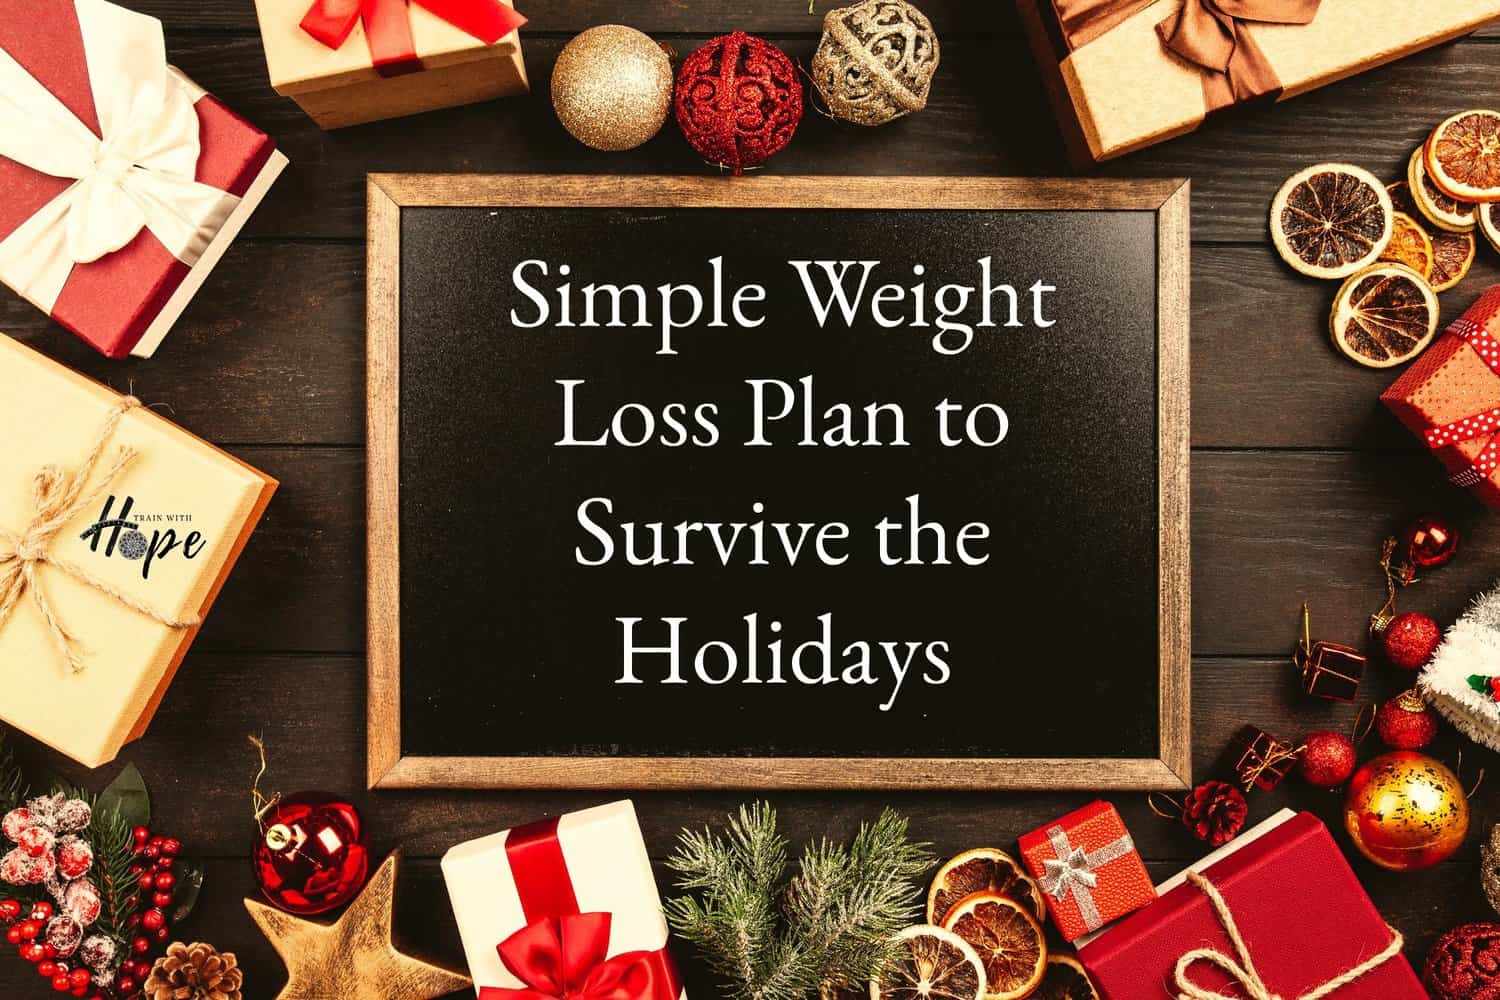 Weight Loss Plans